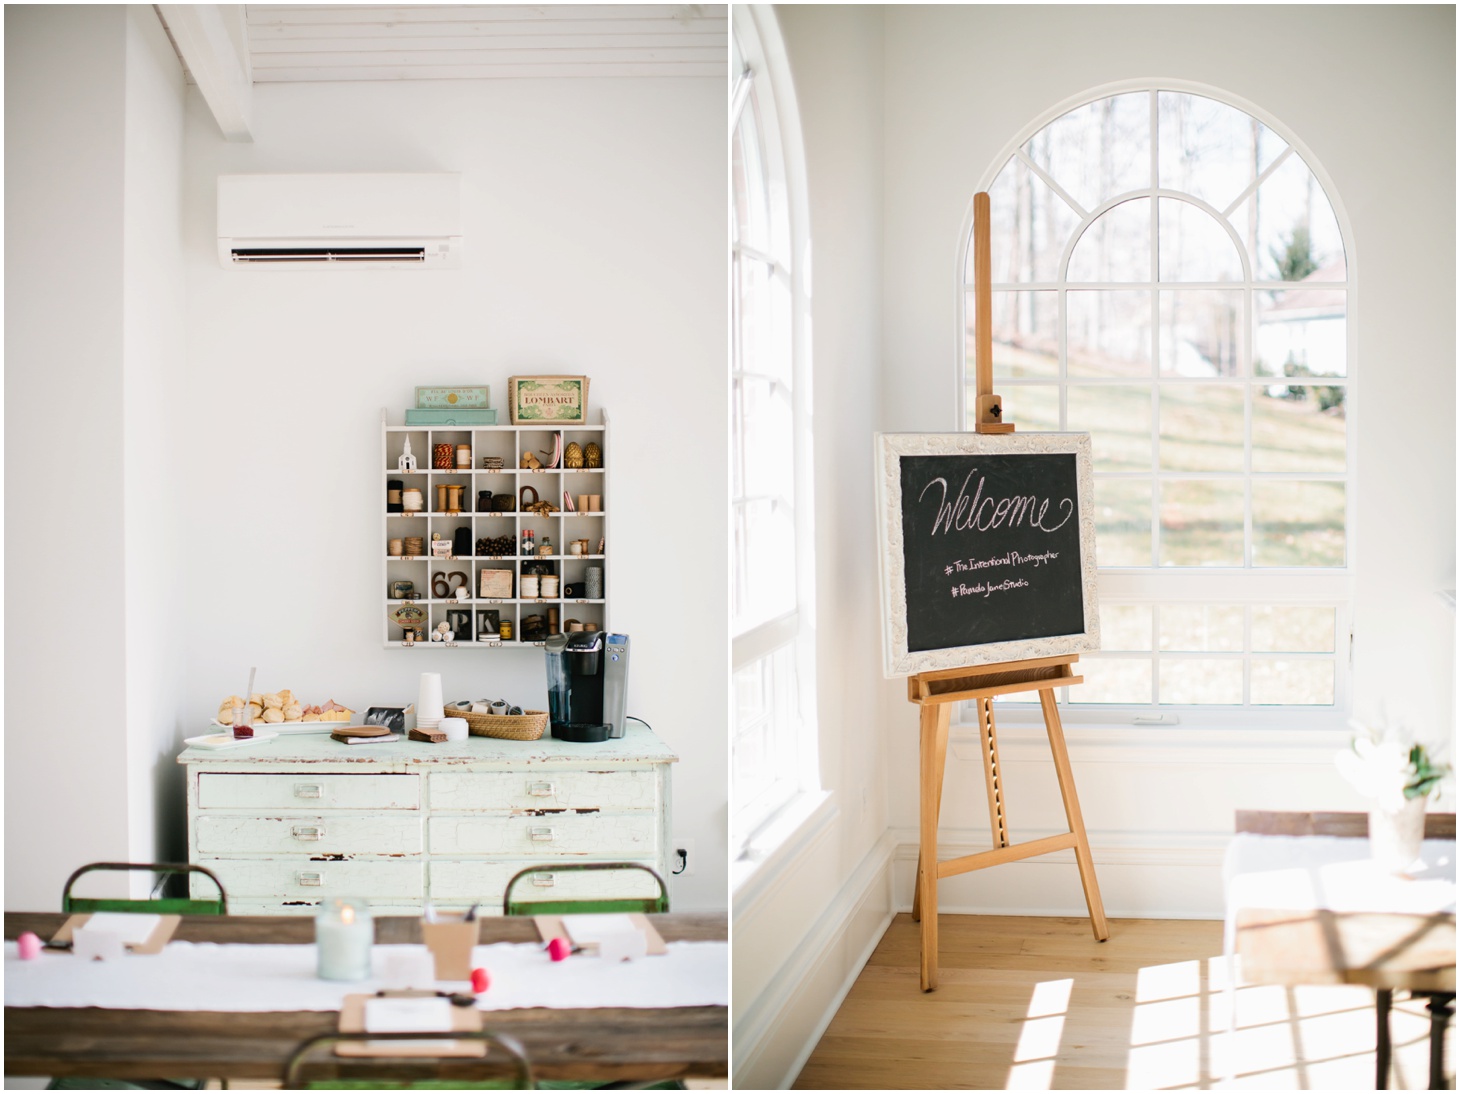 Images Captured By : SARAH BRADSHAW PHOTOGRAPHY